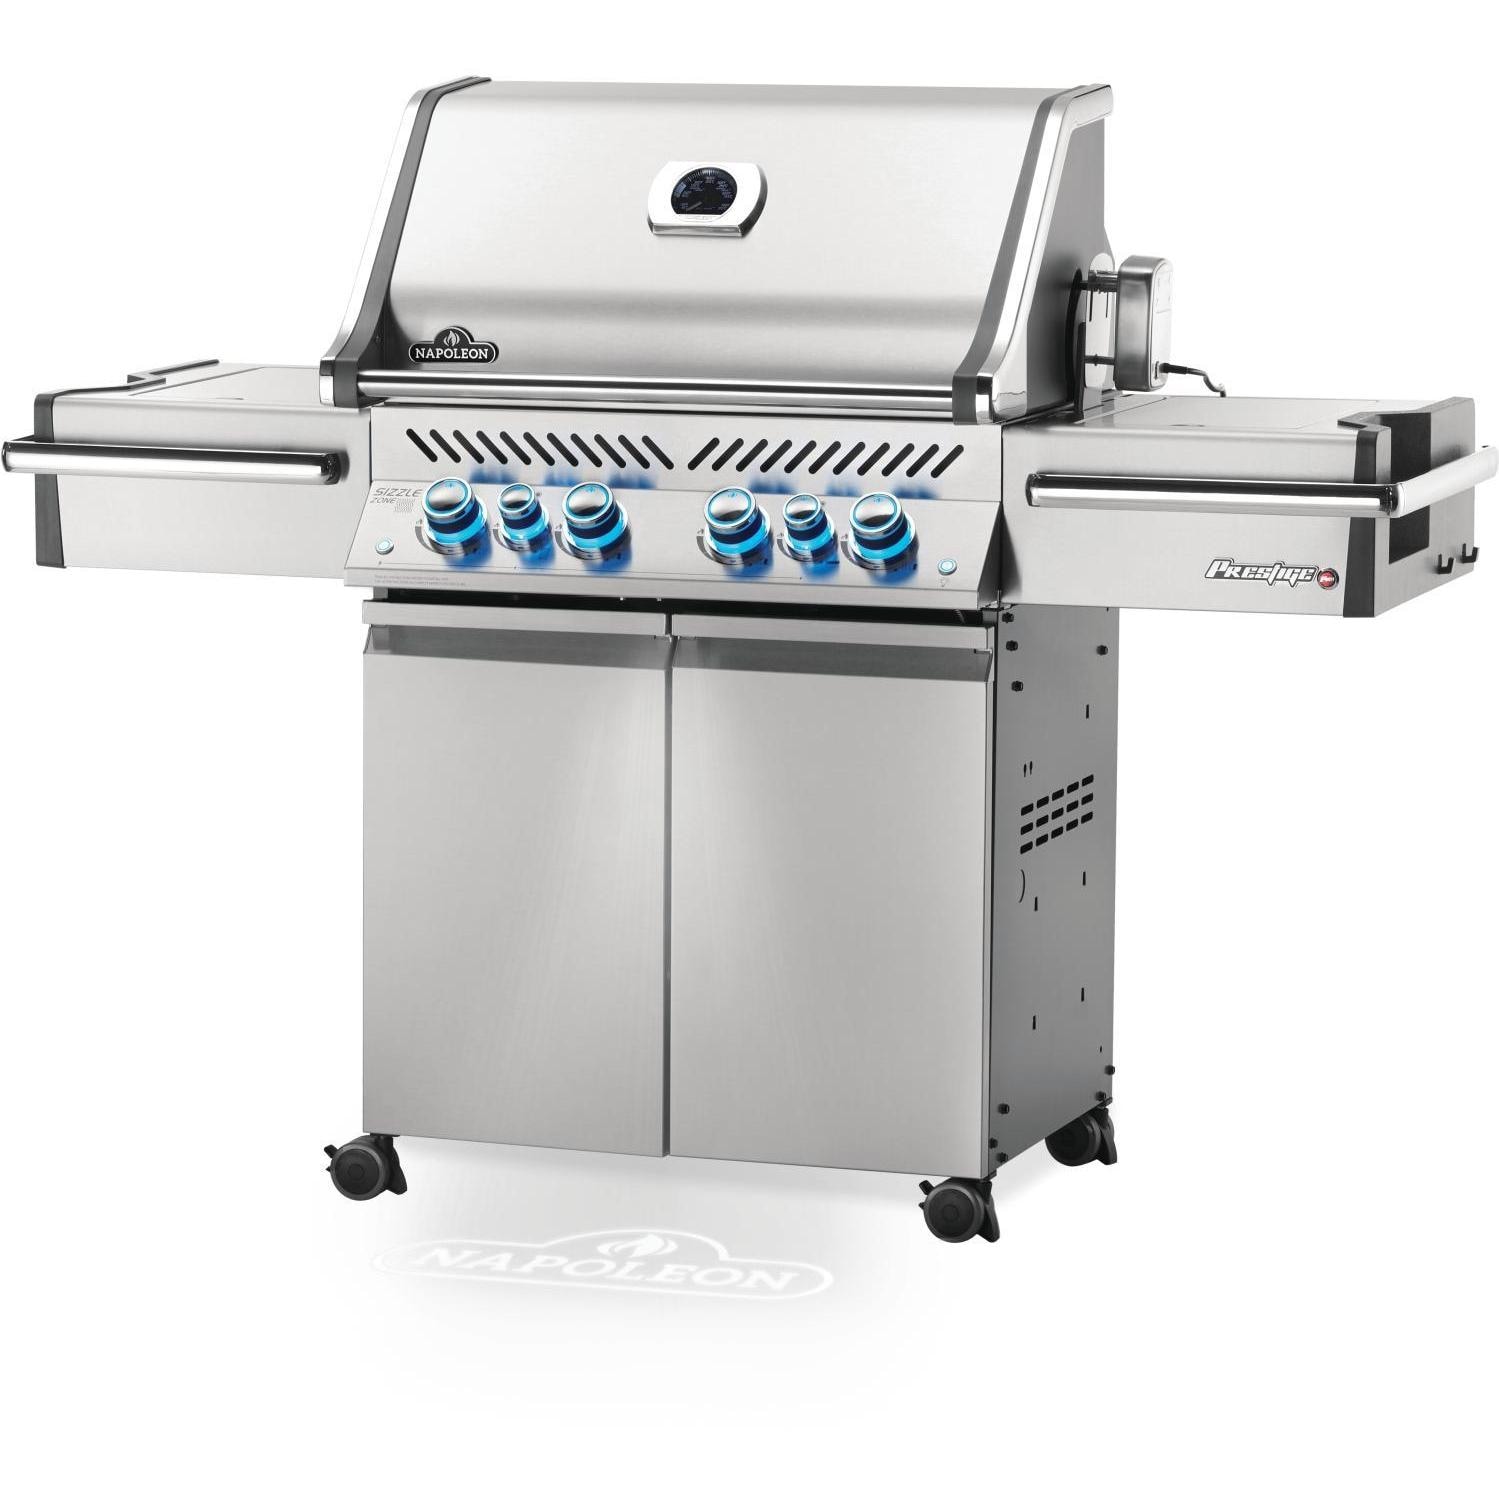 Napoleon PRO500RSIBNSS-3 Prestige Pro 500 Natural Gas Grill w/ Infrared Burners - image 2 of 6